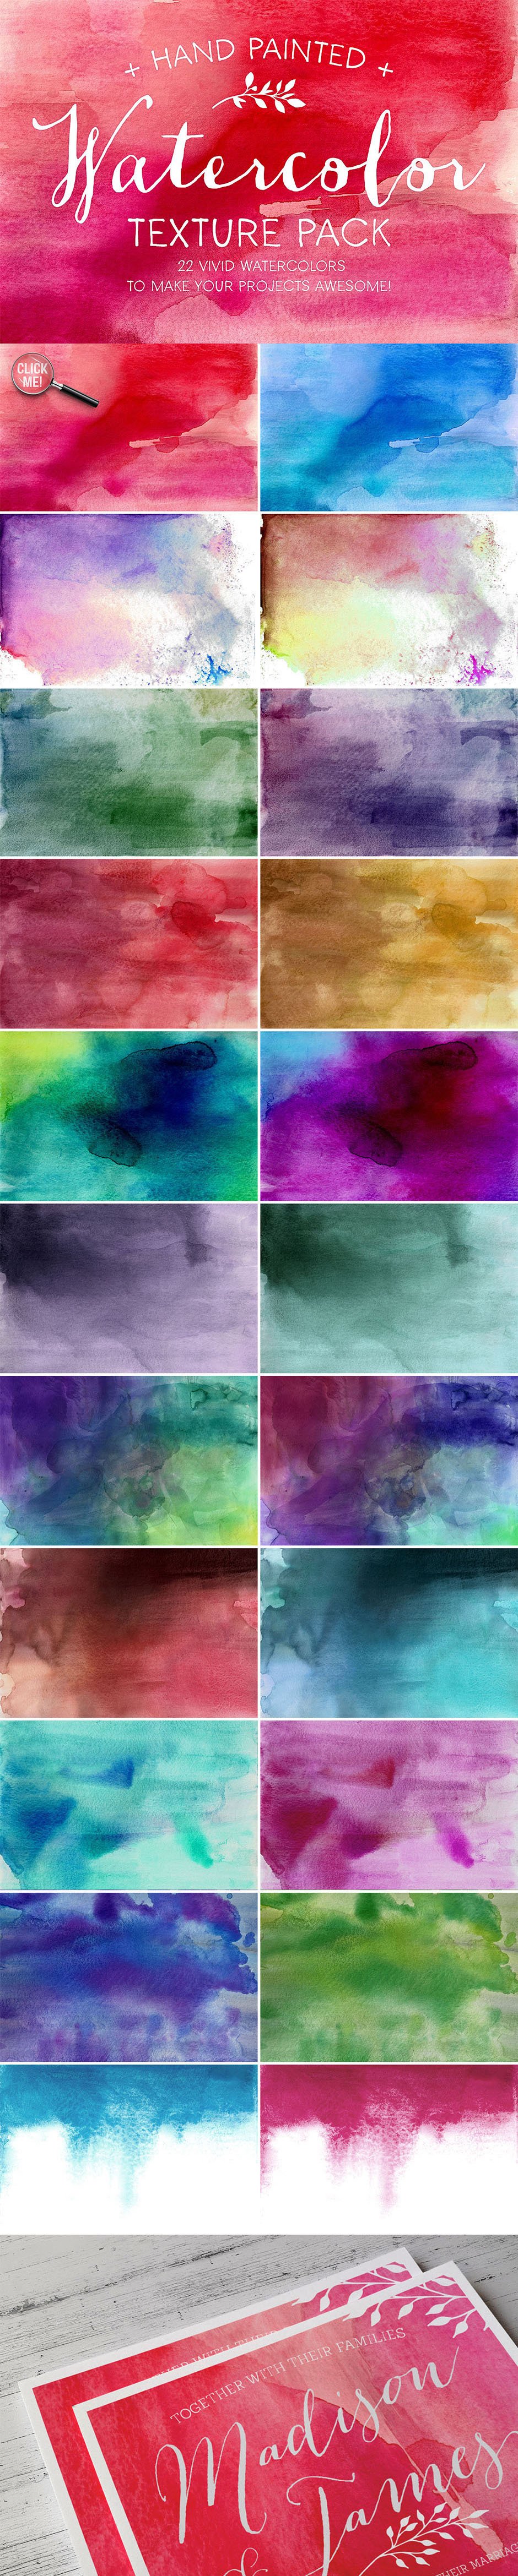 The Watercolor Media Kit for AI